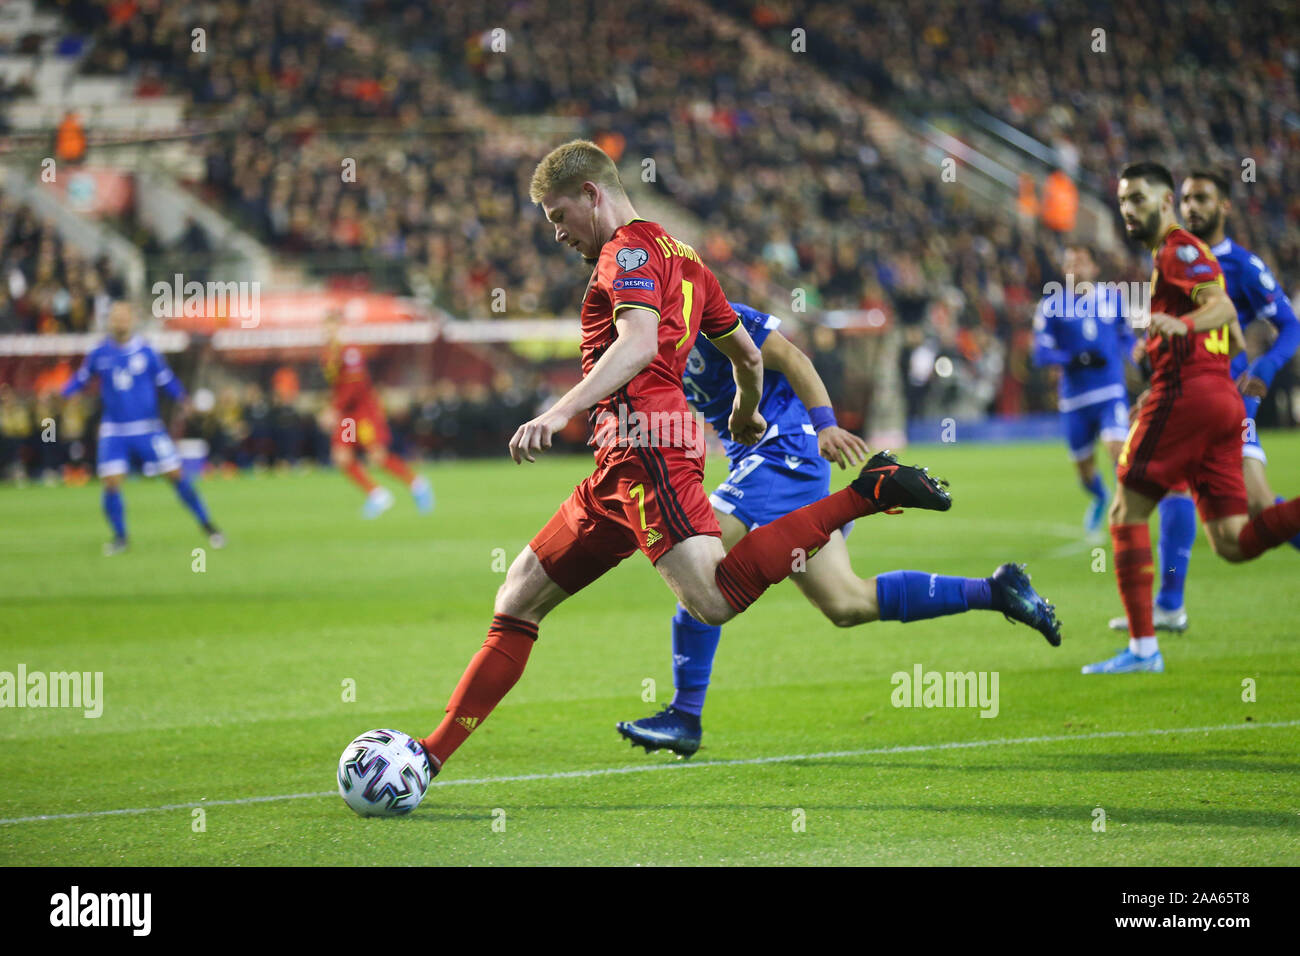 Brussels, Belgium. 19th Nov, 2019. Kevin De Bruyne (Front) of Belgium passes the ball during a UEFA Euro 2020 group I qualifying match between Belgium and Cyprus in Brussels, Belgium, Nov. 19, 2019. Credit: Zheng Huansong/Xinhua/Alamy Live News Stock Photo